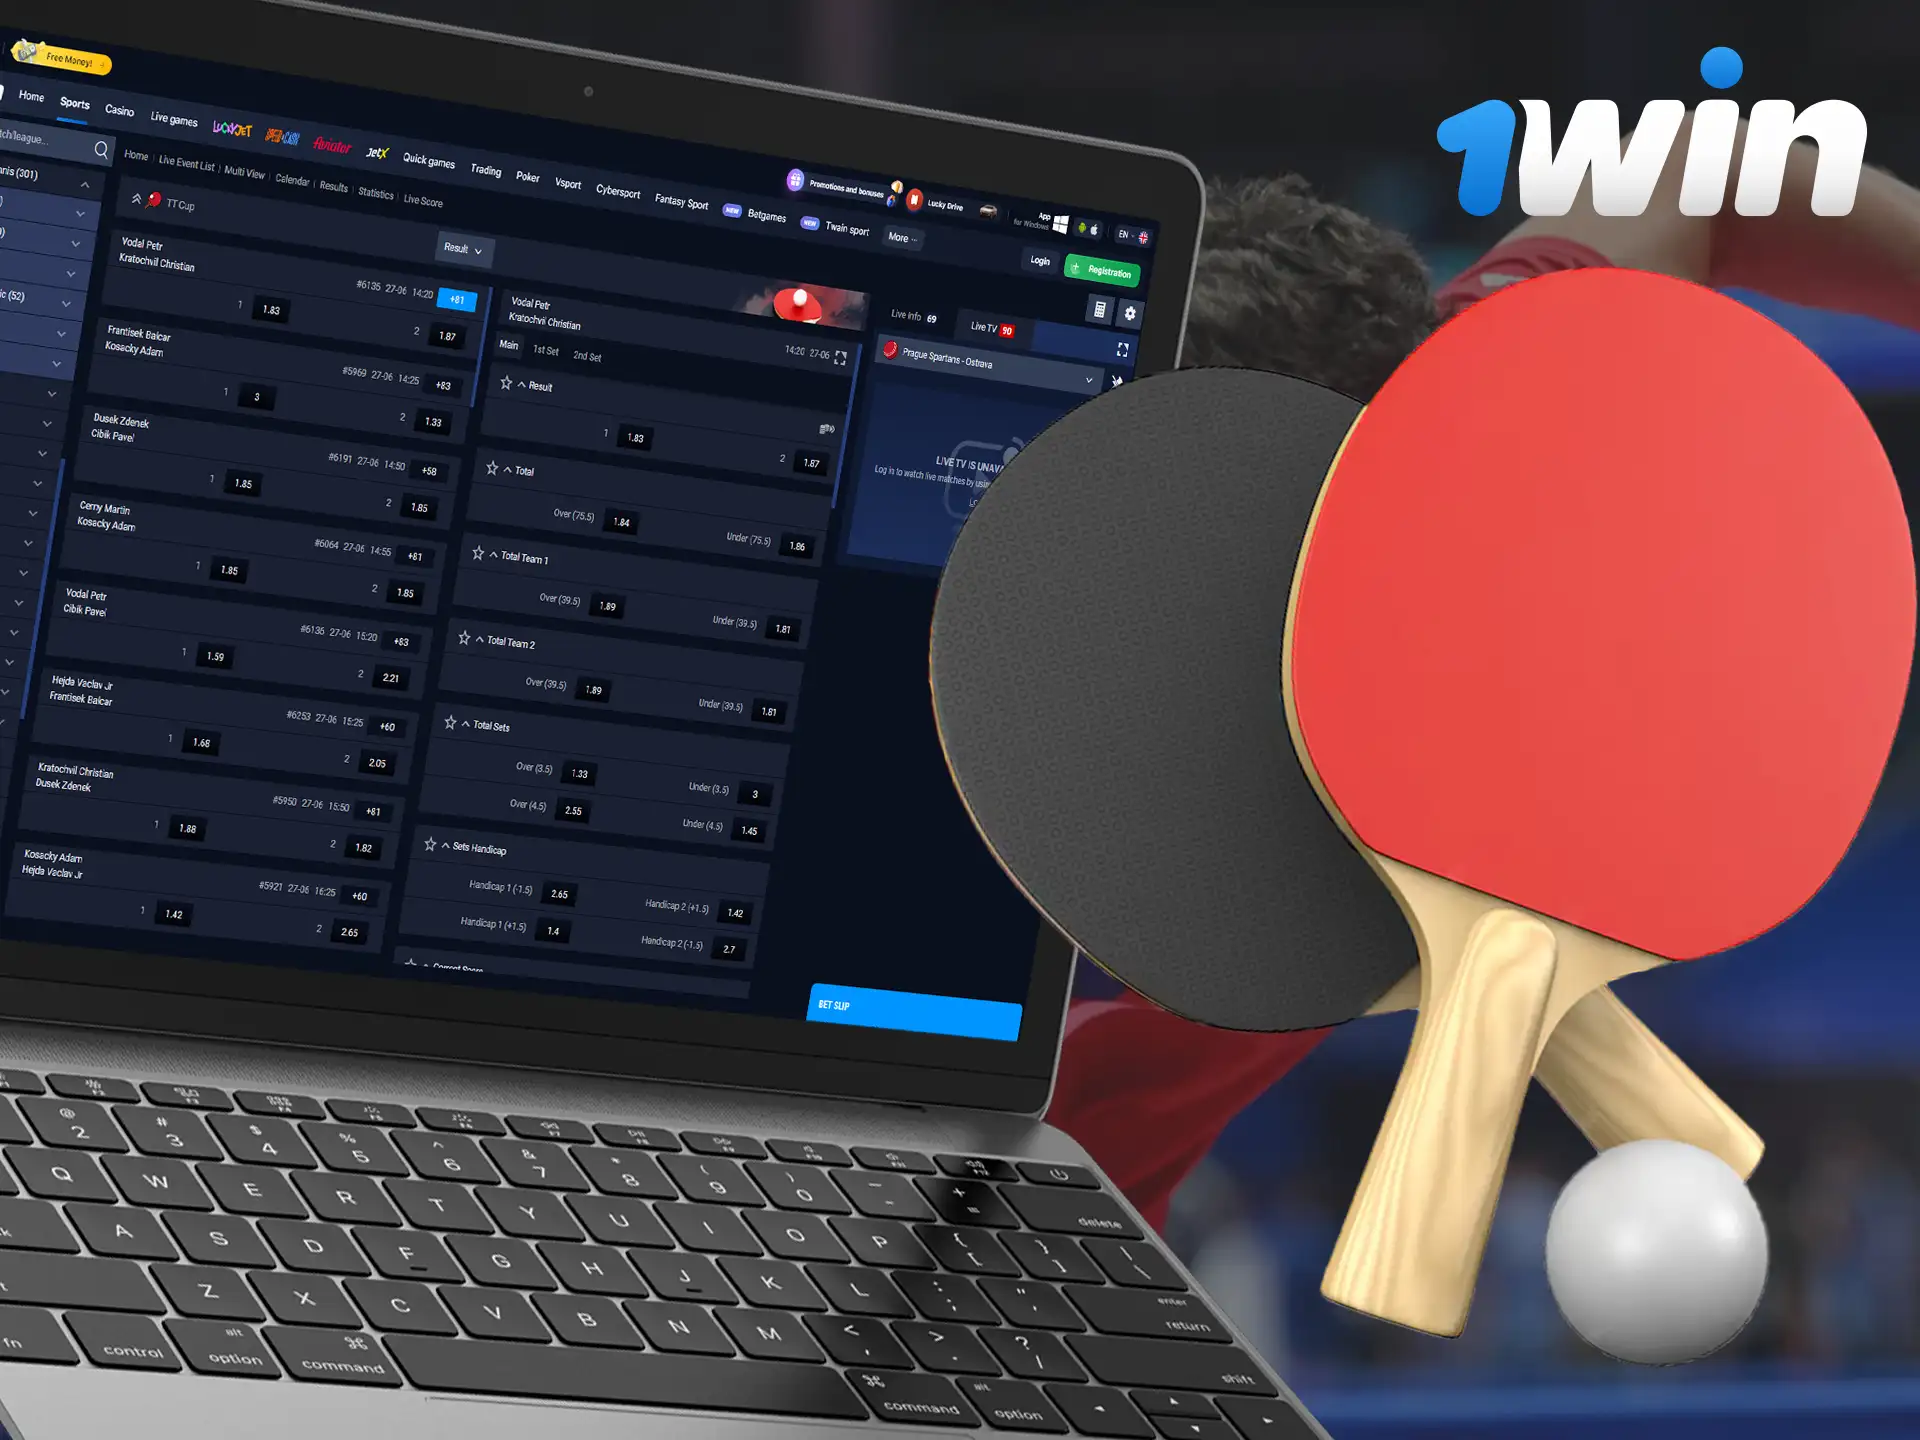 Table tennis is one of the fastest growing sports and you can bet on it at 1Win.